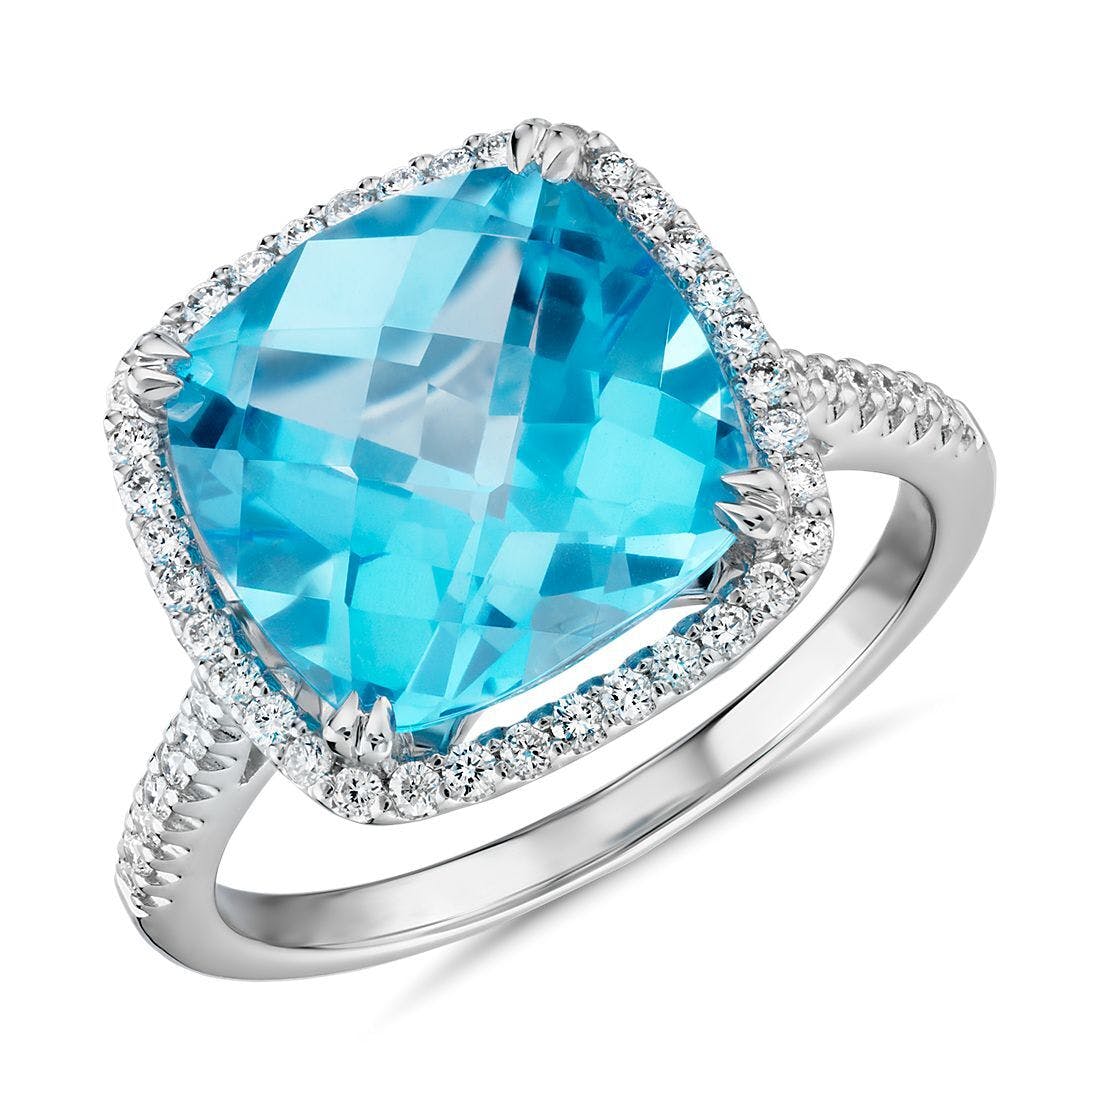 Fourth Year Anniversary Gift Guide: Blue Topaz